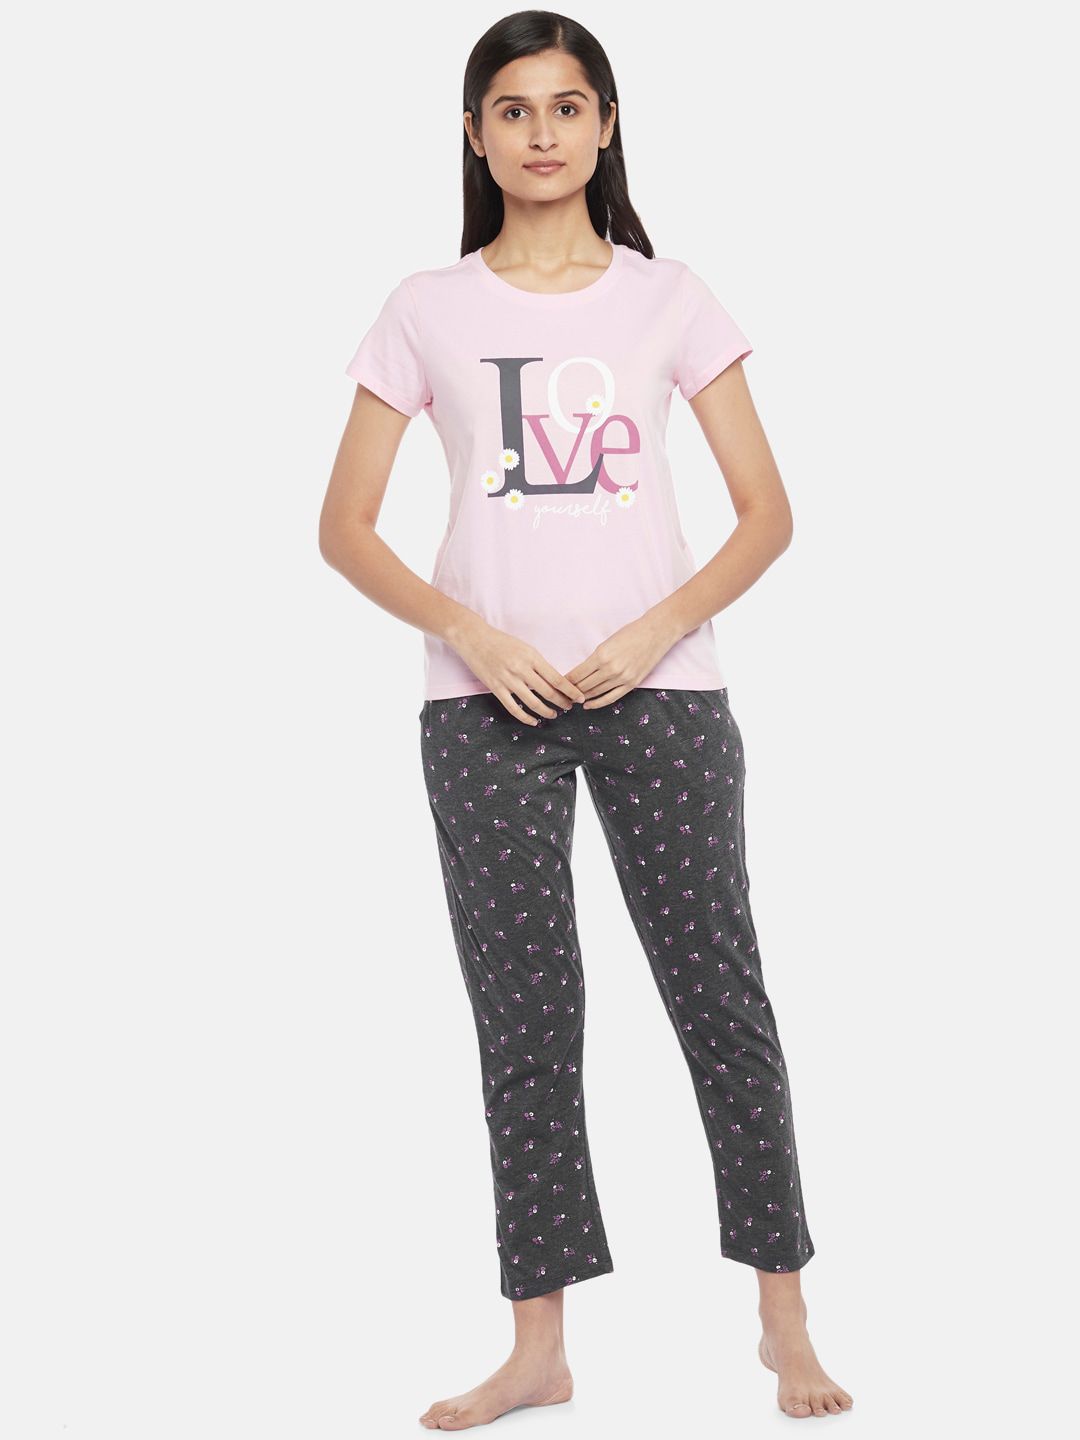 Dreamz by Pantaloons Women Pink & Grey Printed Cotton Night suit Price in India